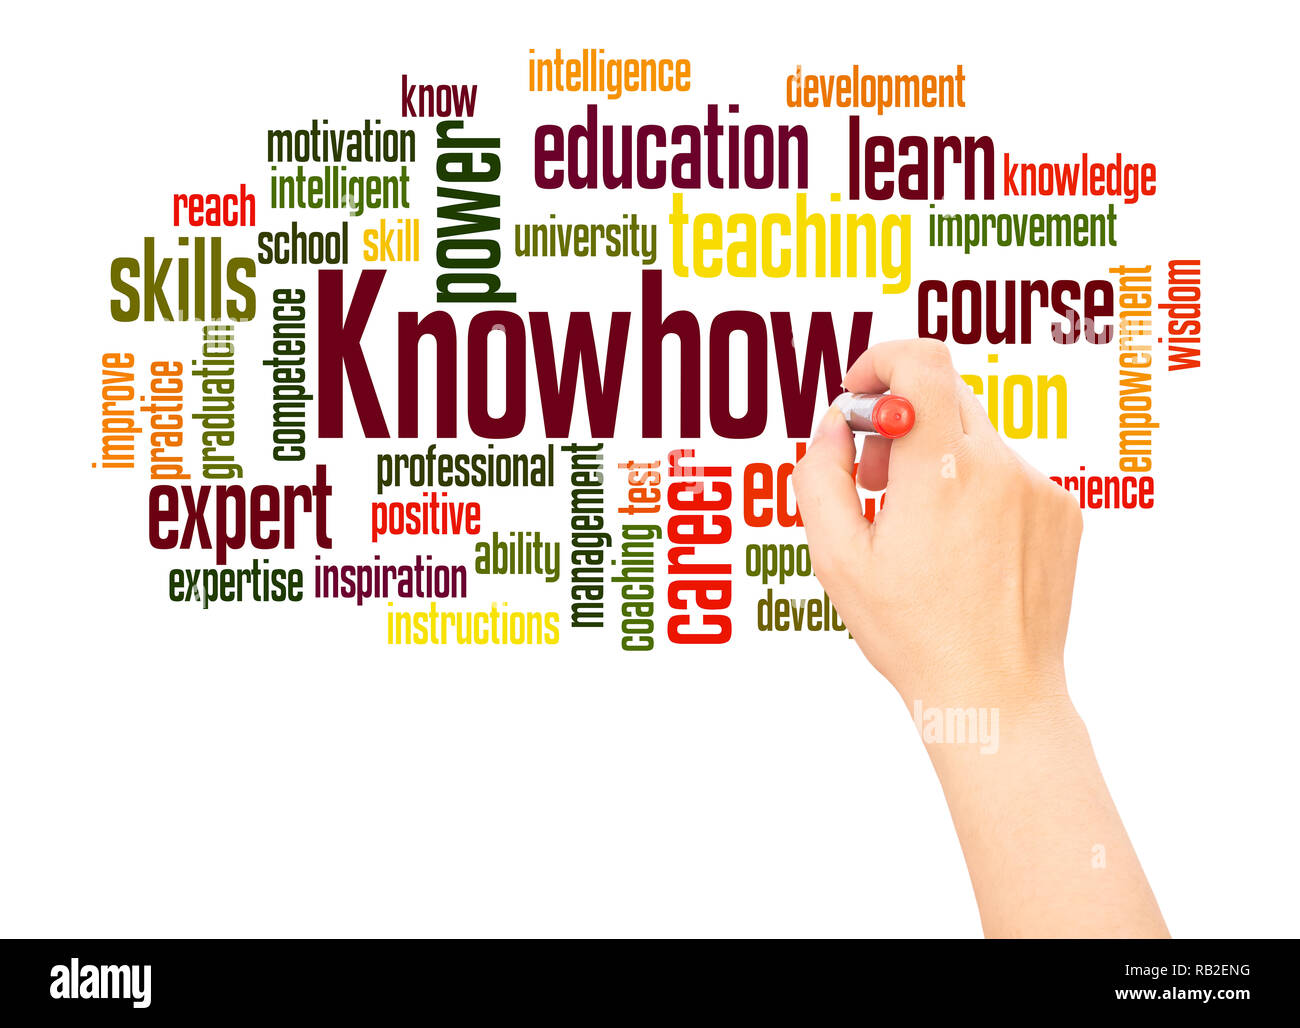 Knowhow word cloud hand writing  concept on white background. Stock Photo